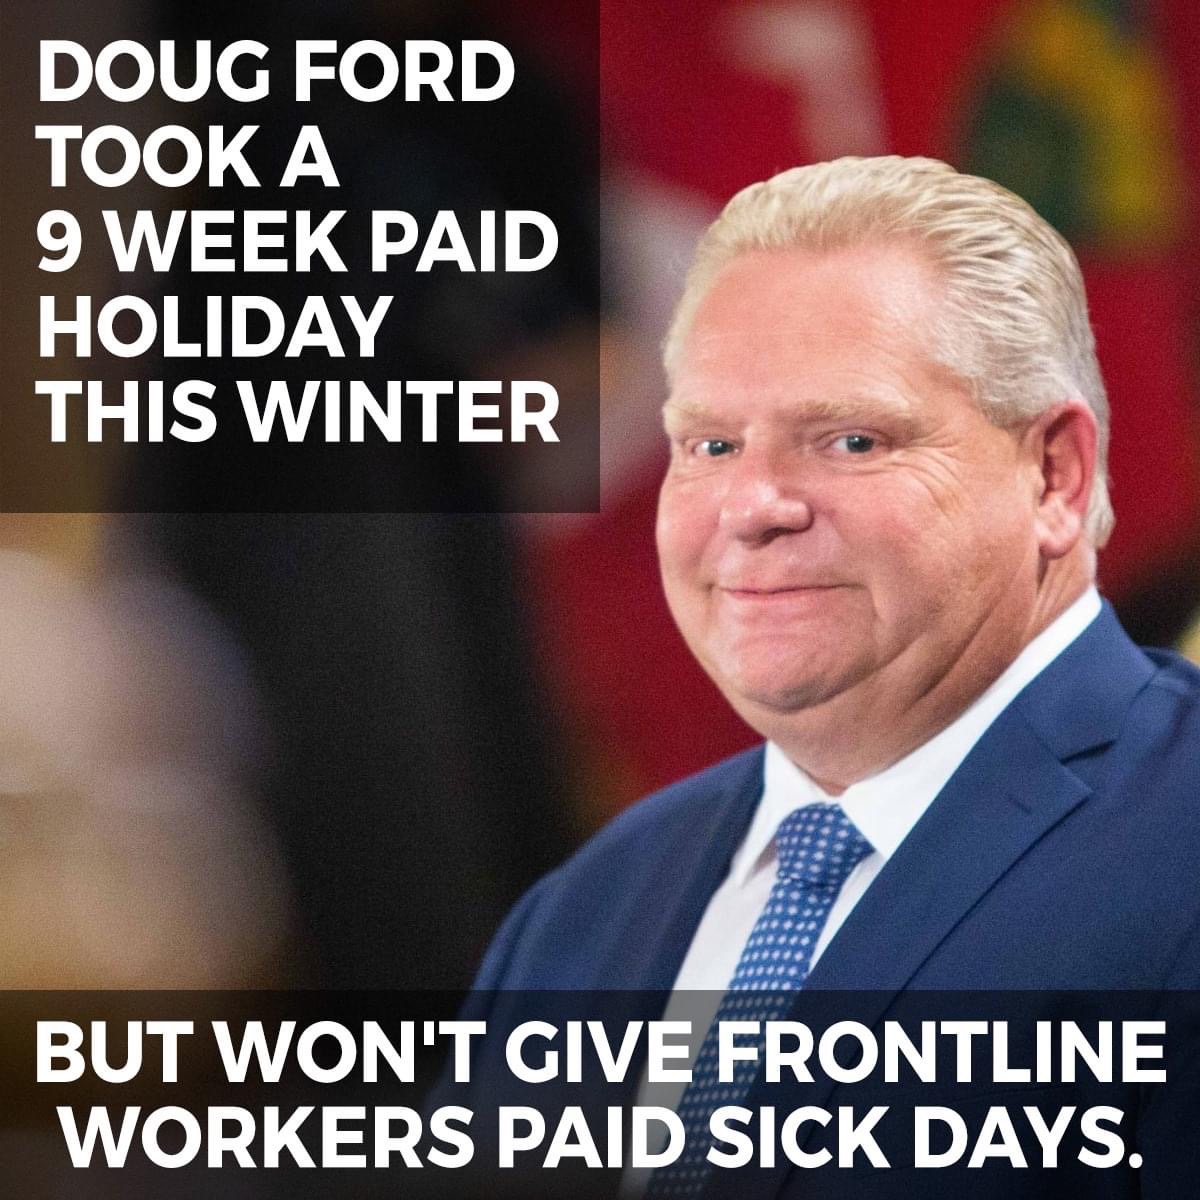 Doug Ford is still a hypocrite!

#RepealBill124
#10PaidSickDays
#VoteFordOut 
#NeverVoteConservative